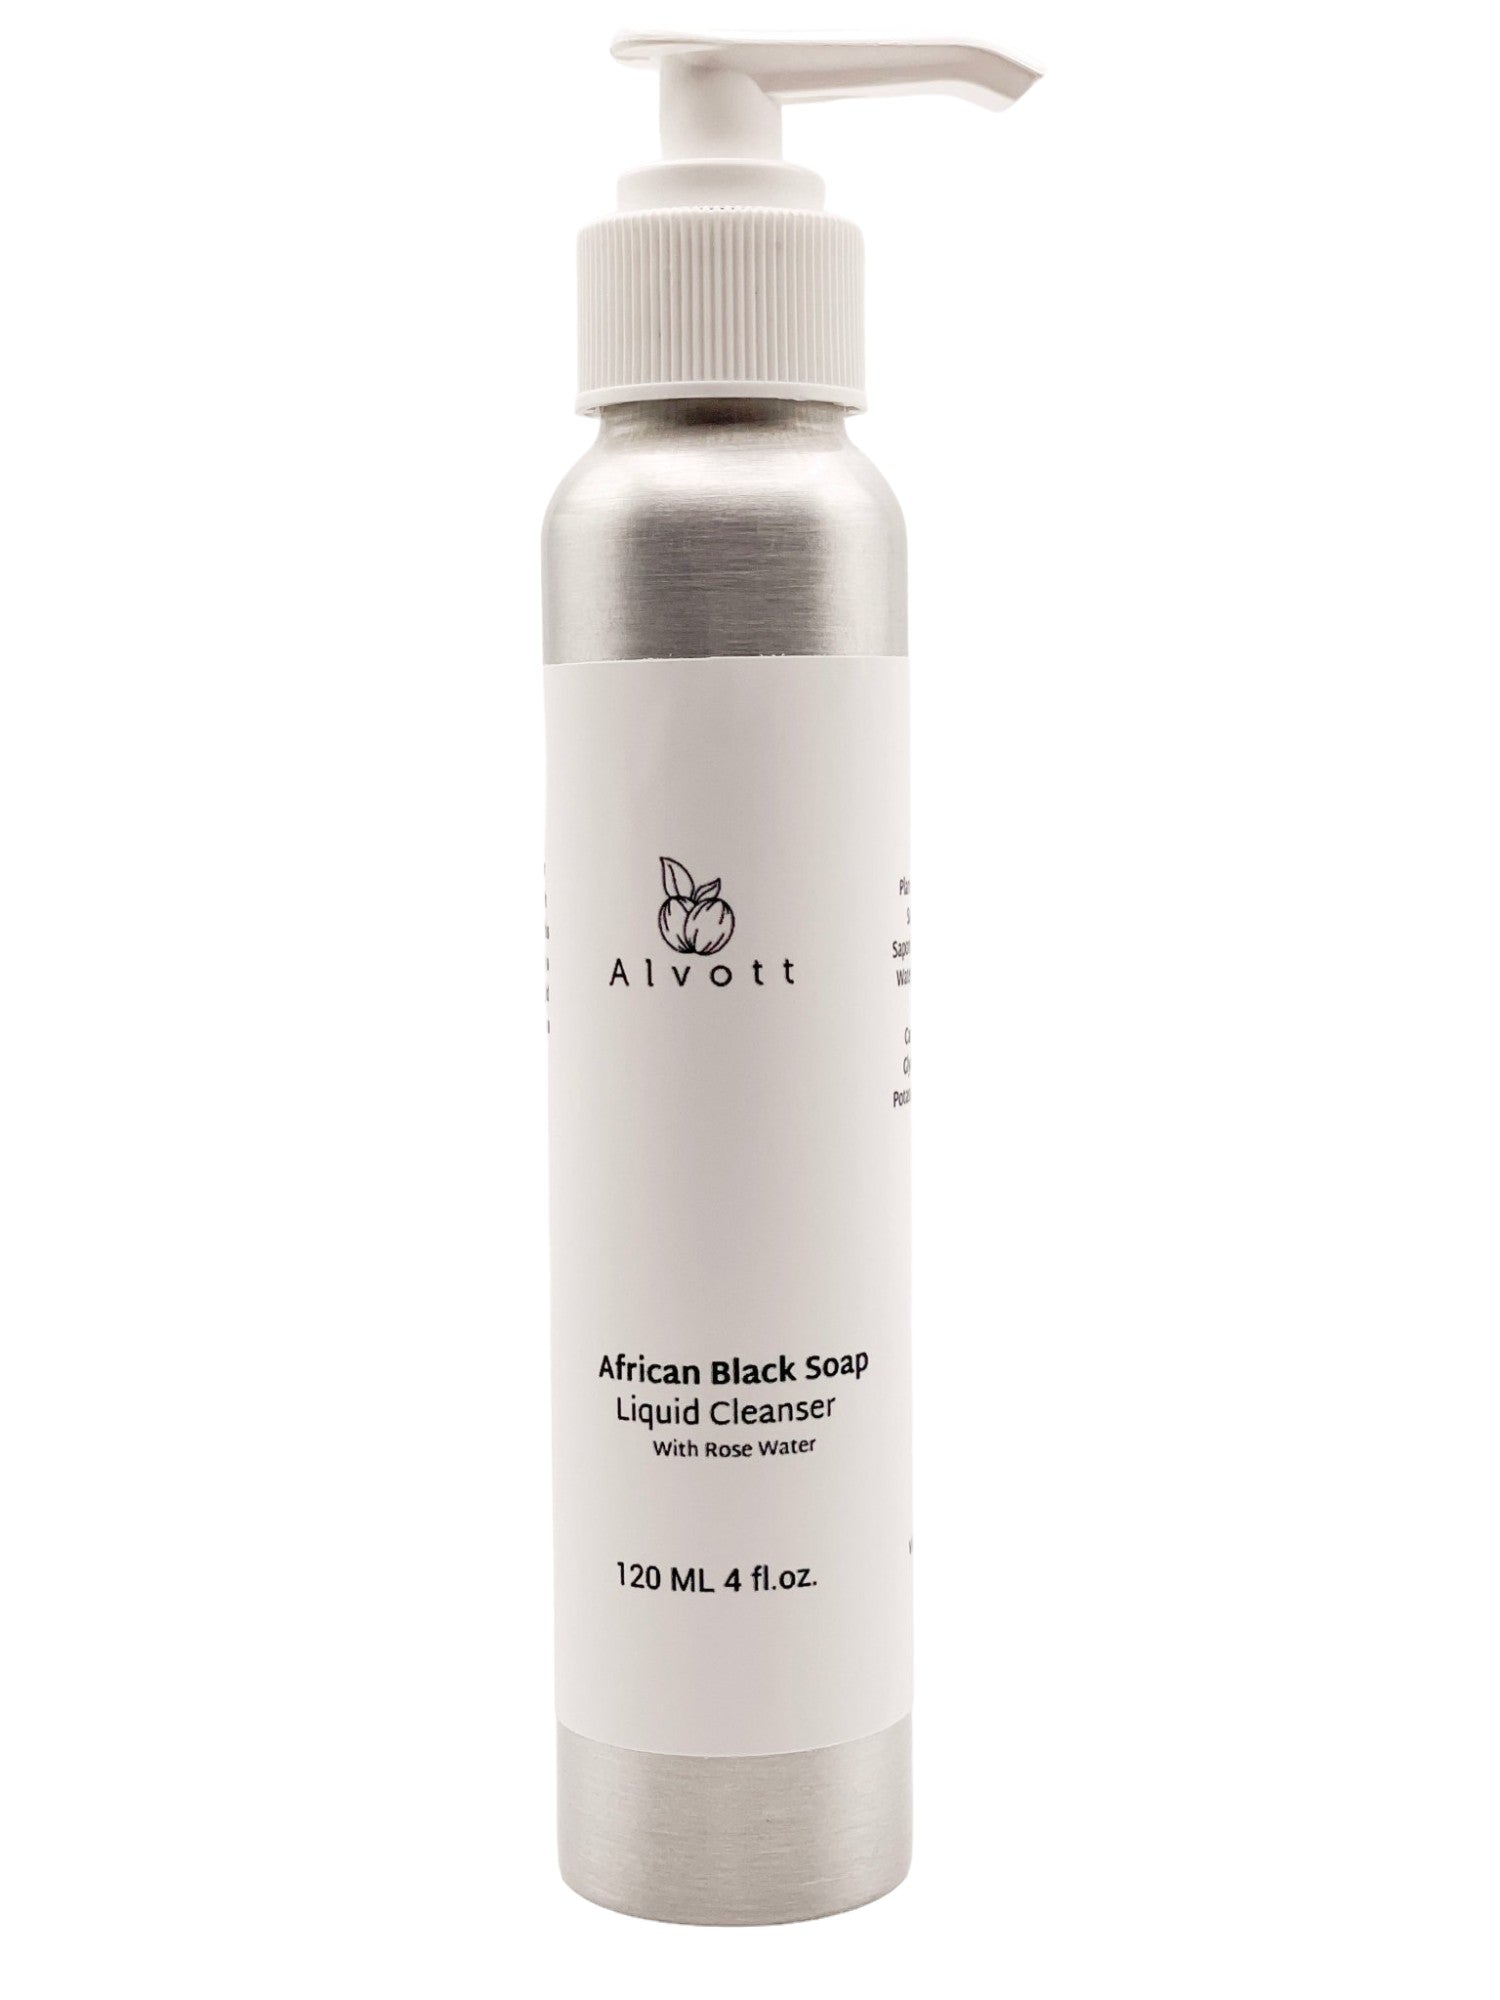 All-in-one Liquid Black Soap Cleanser